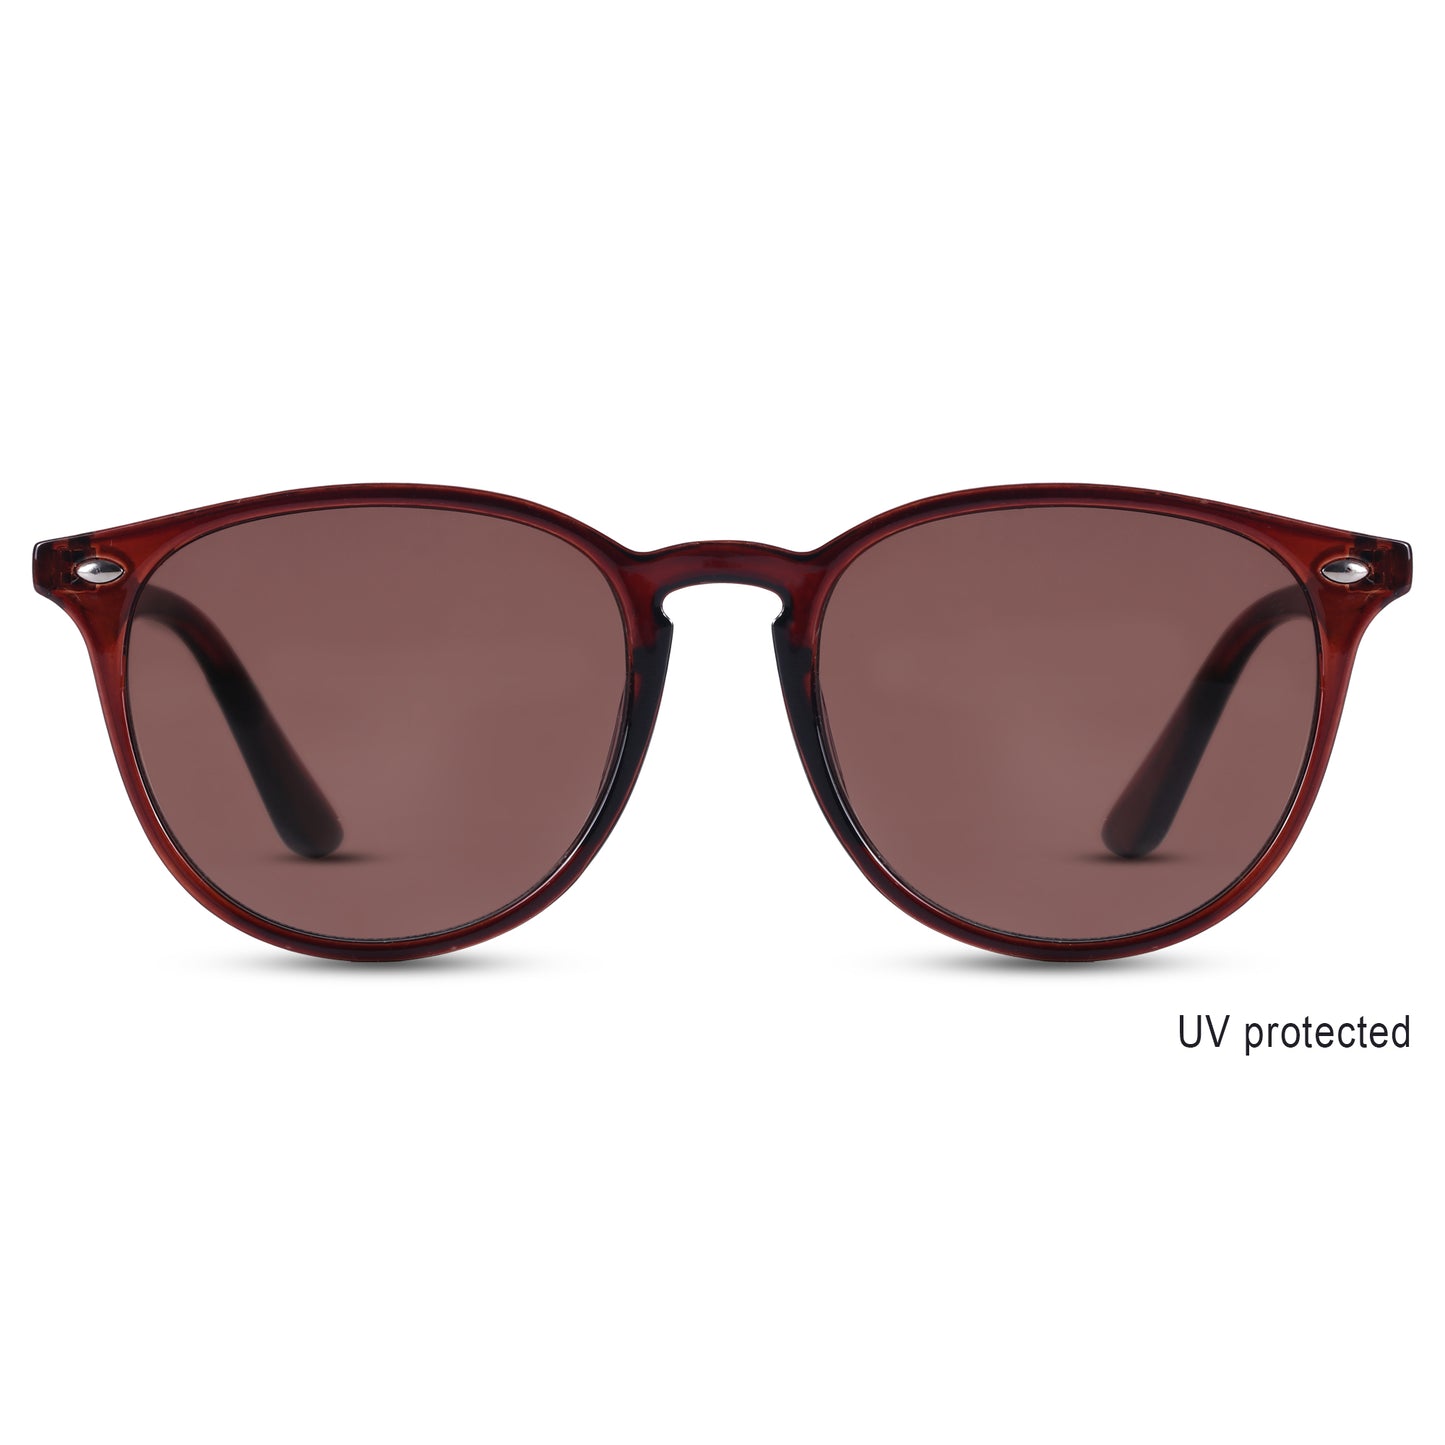 2.5 NVG UV Protected Brown Round Sunglasses